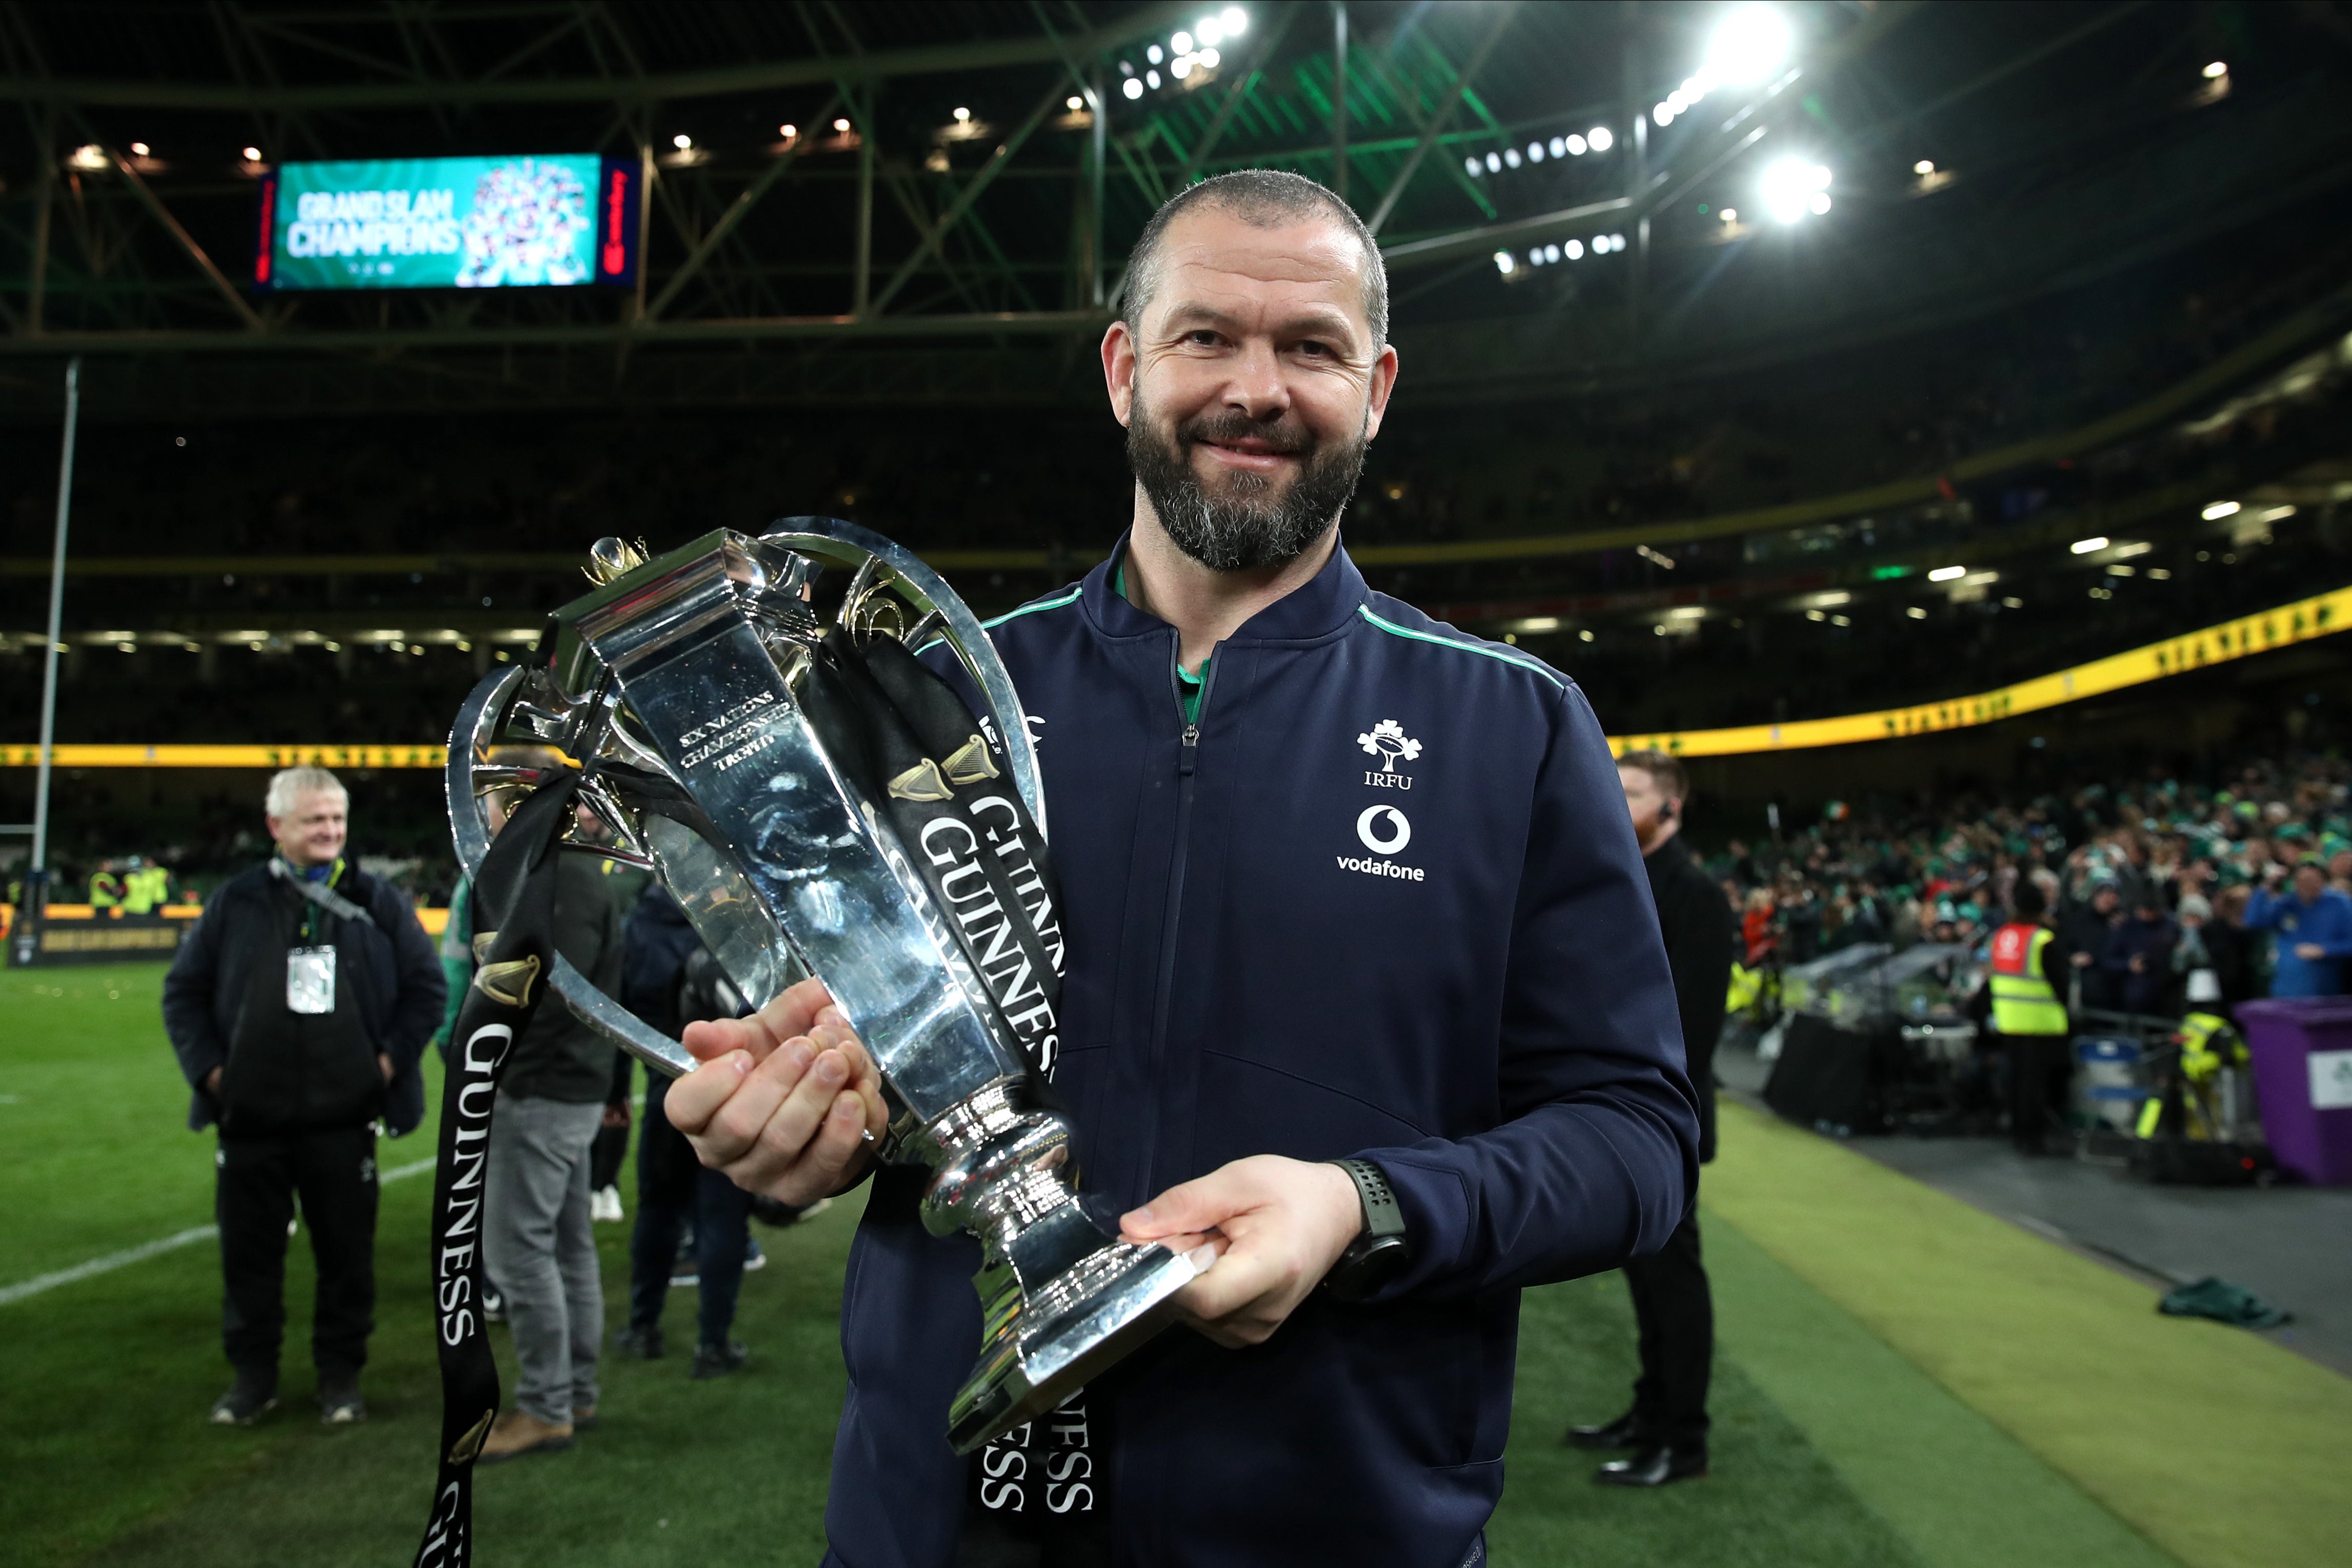 Andy Farrell led Ireland to a Six Nations grand slam last year